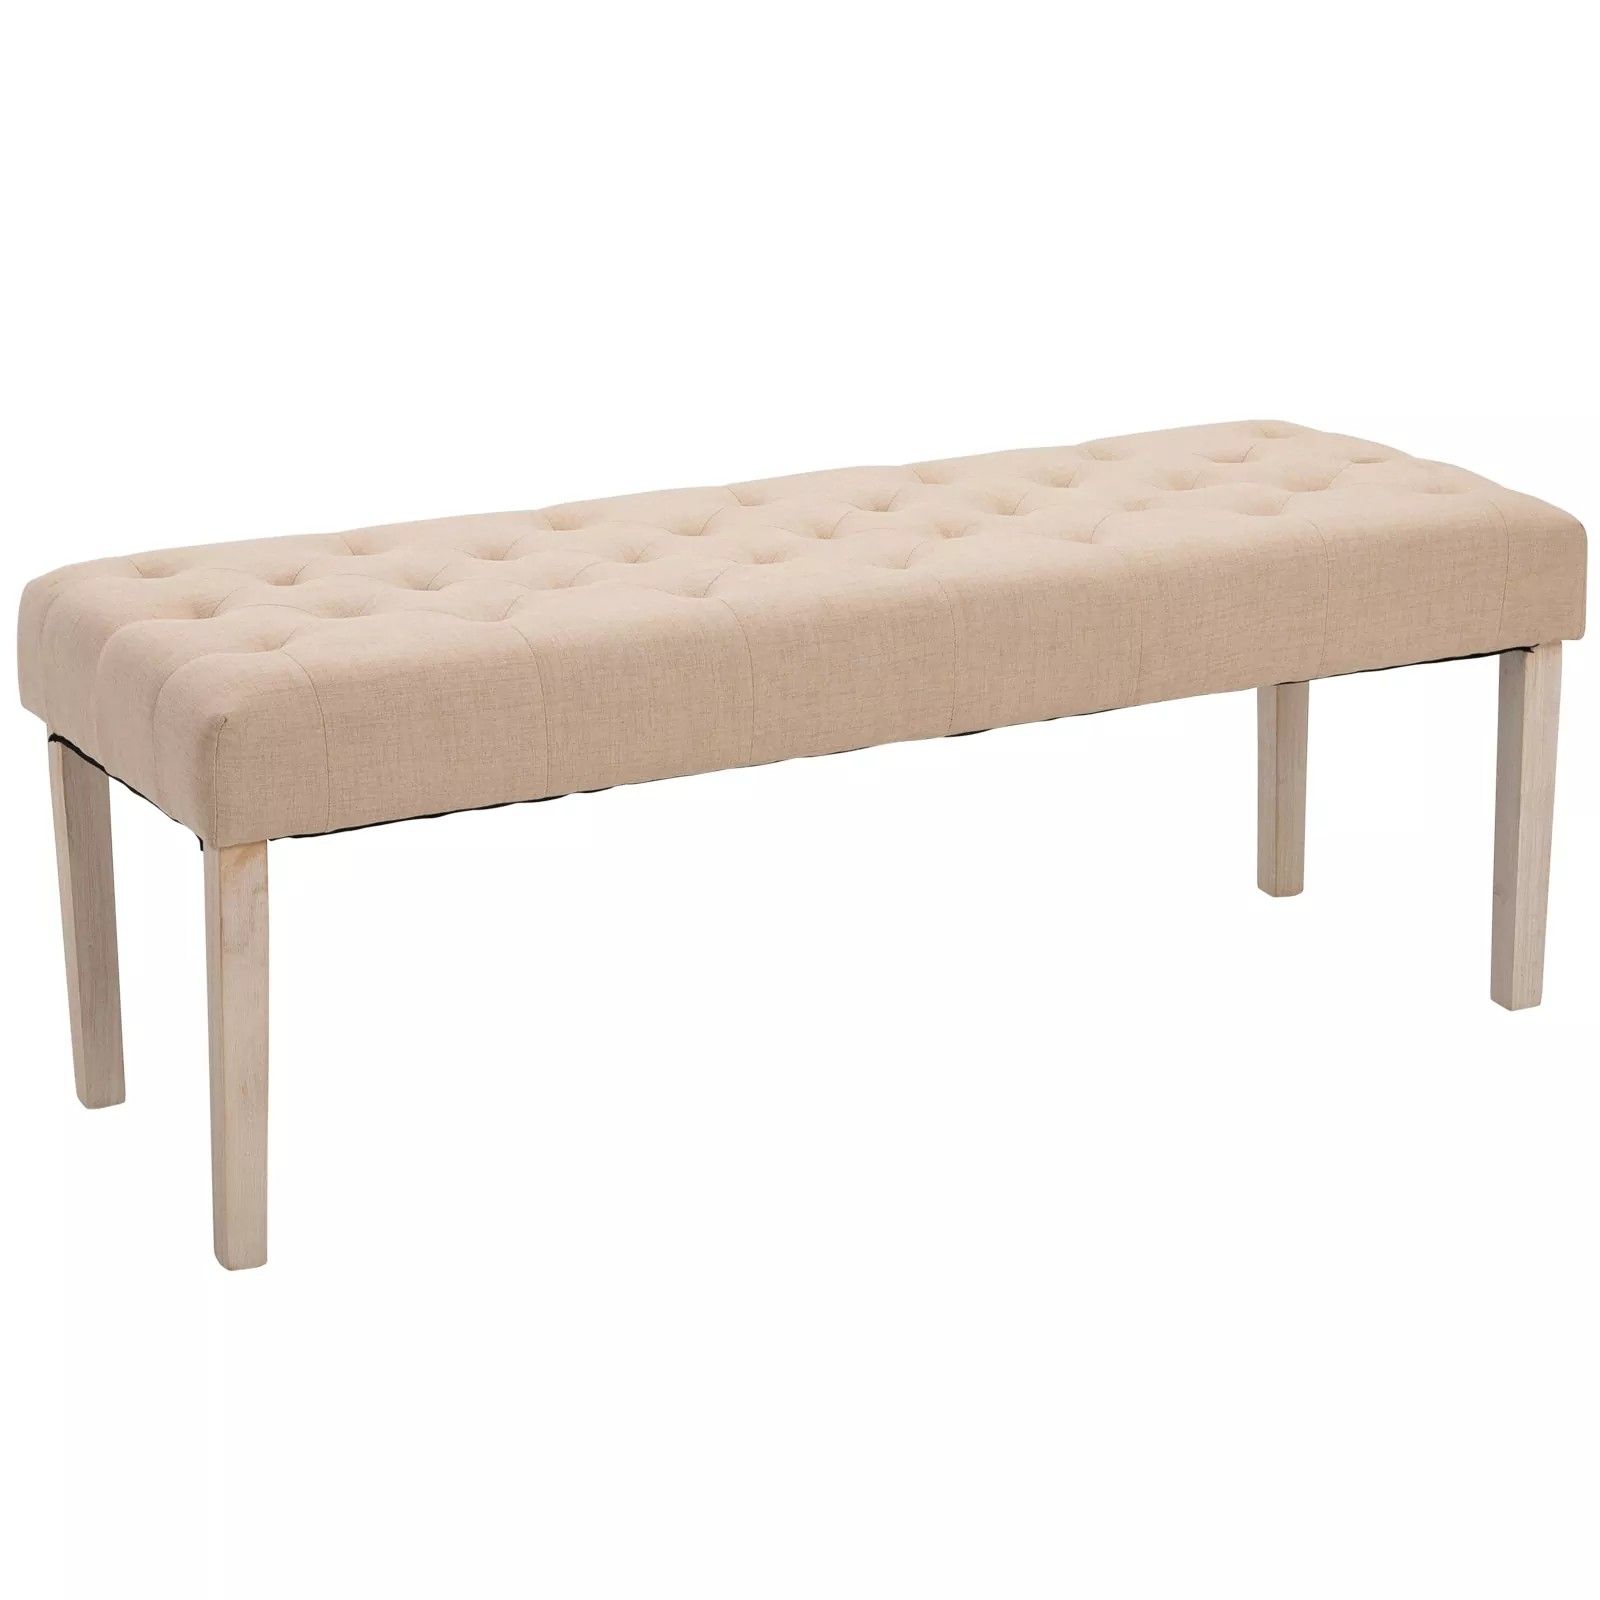 Tufted Upholstered Ottoman Accent Bench